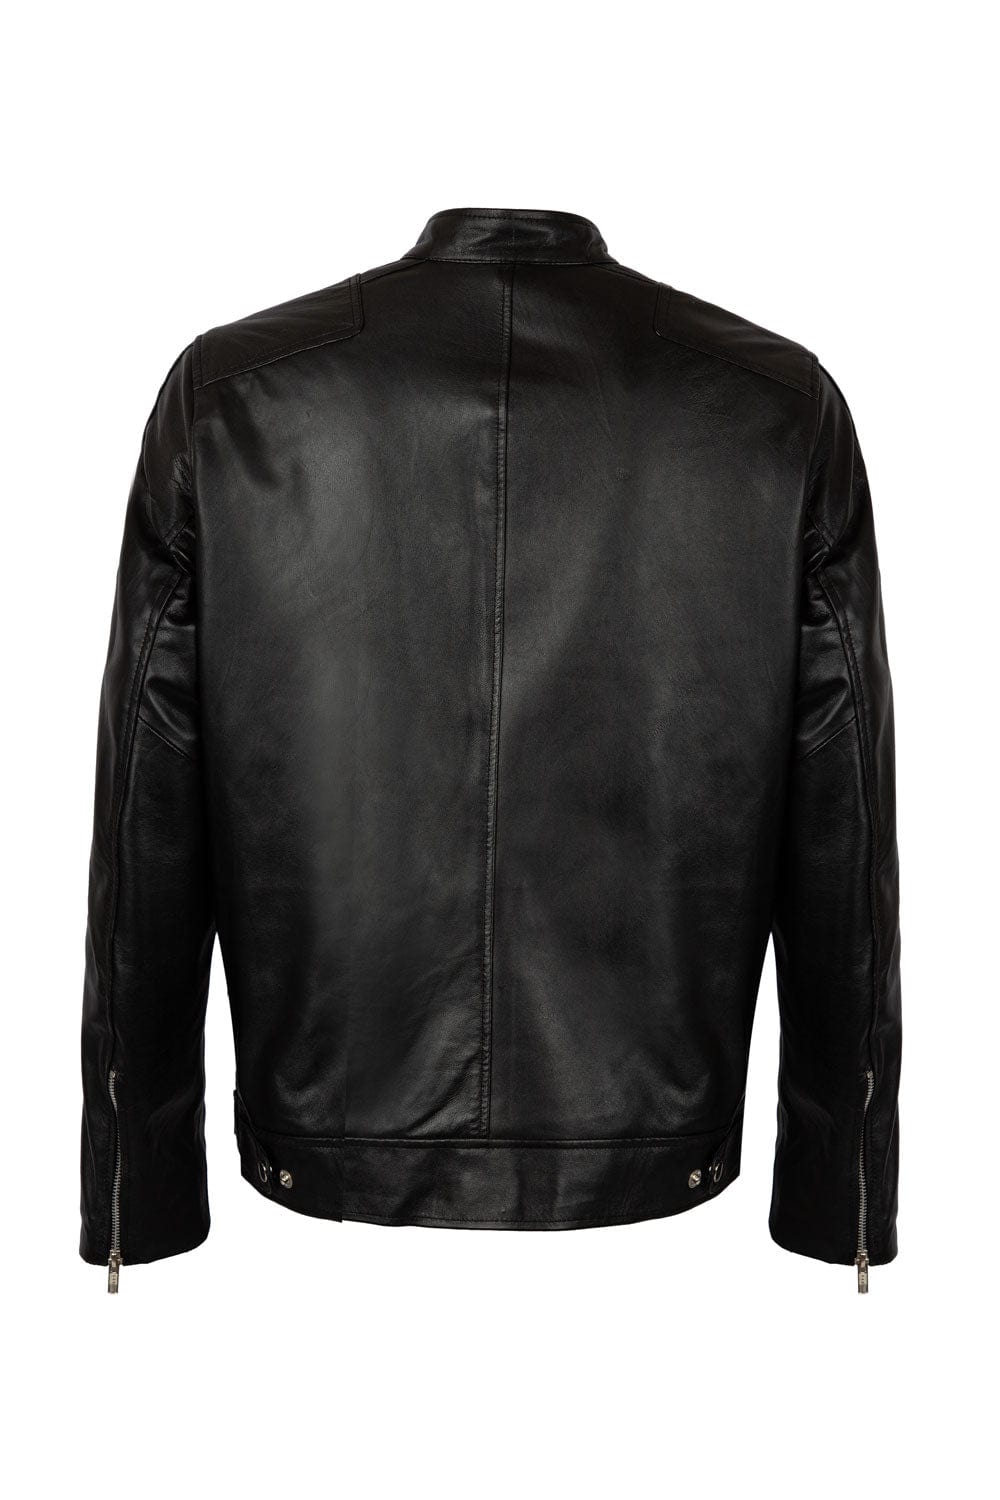 Hope Not Out by Shahid Afridi Men Jacket Premium Leather Jacket With Zipper Pockets